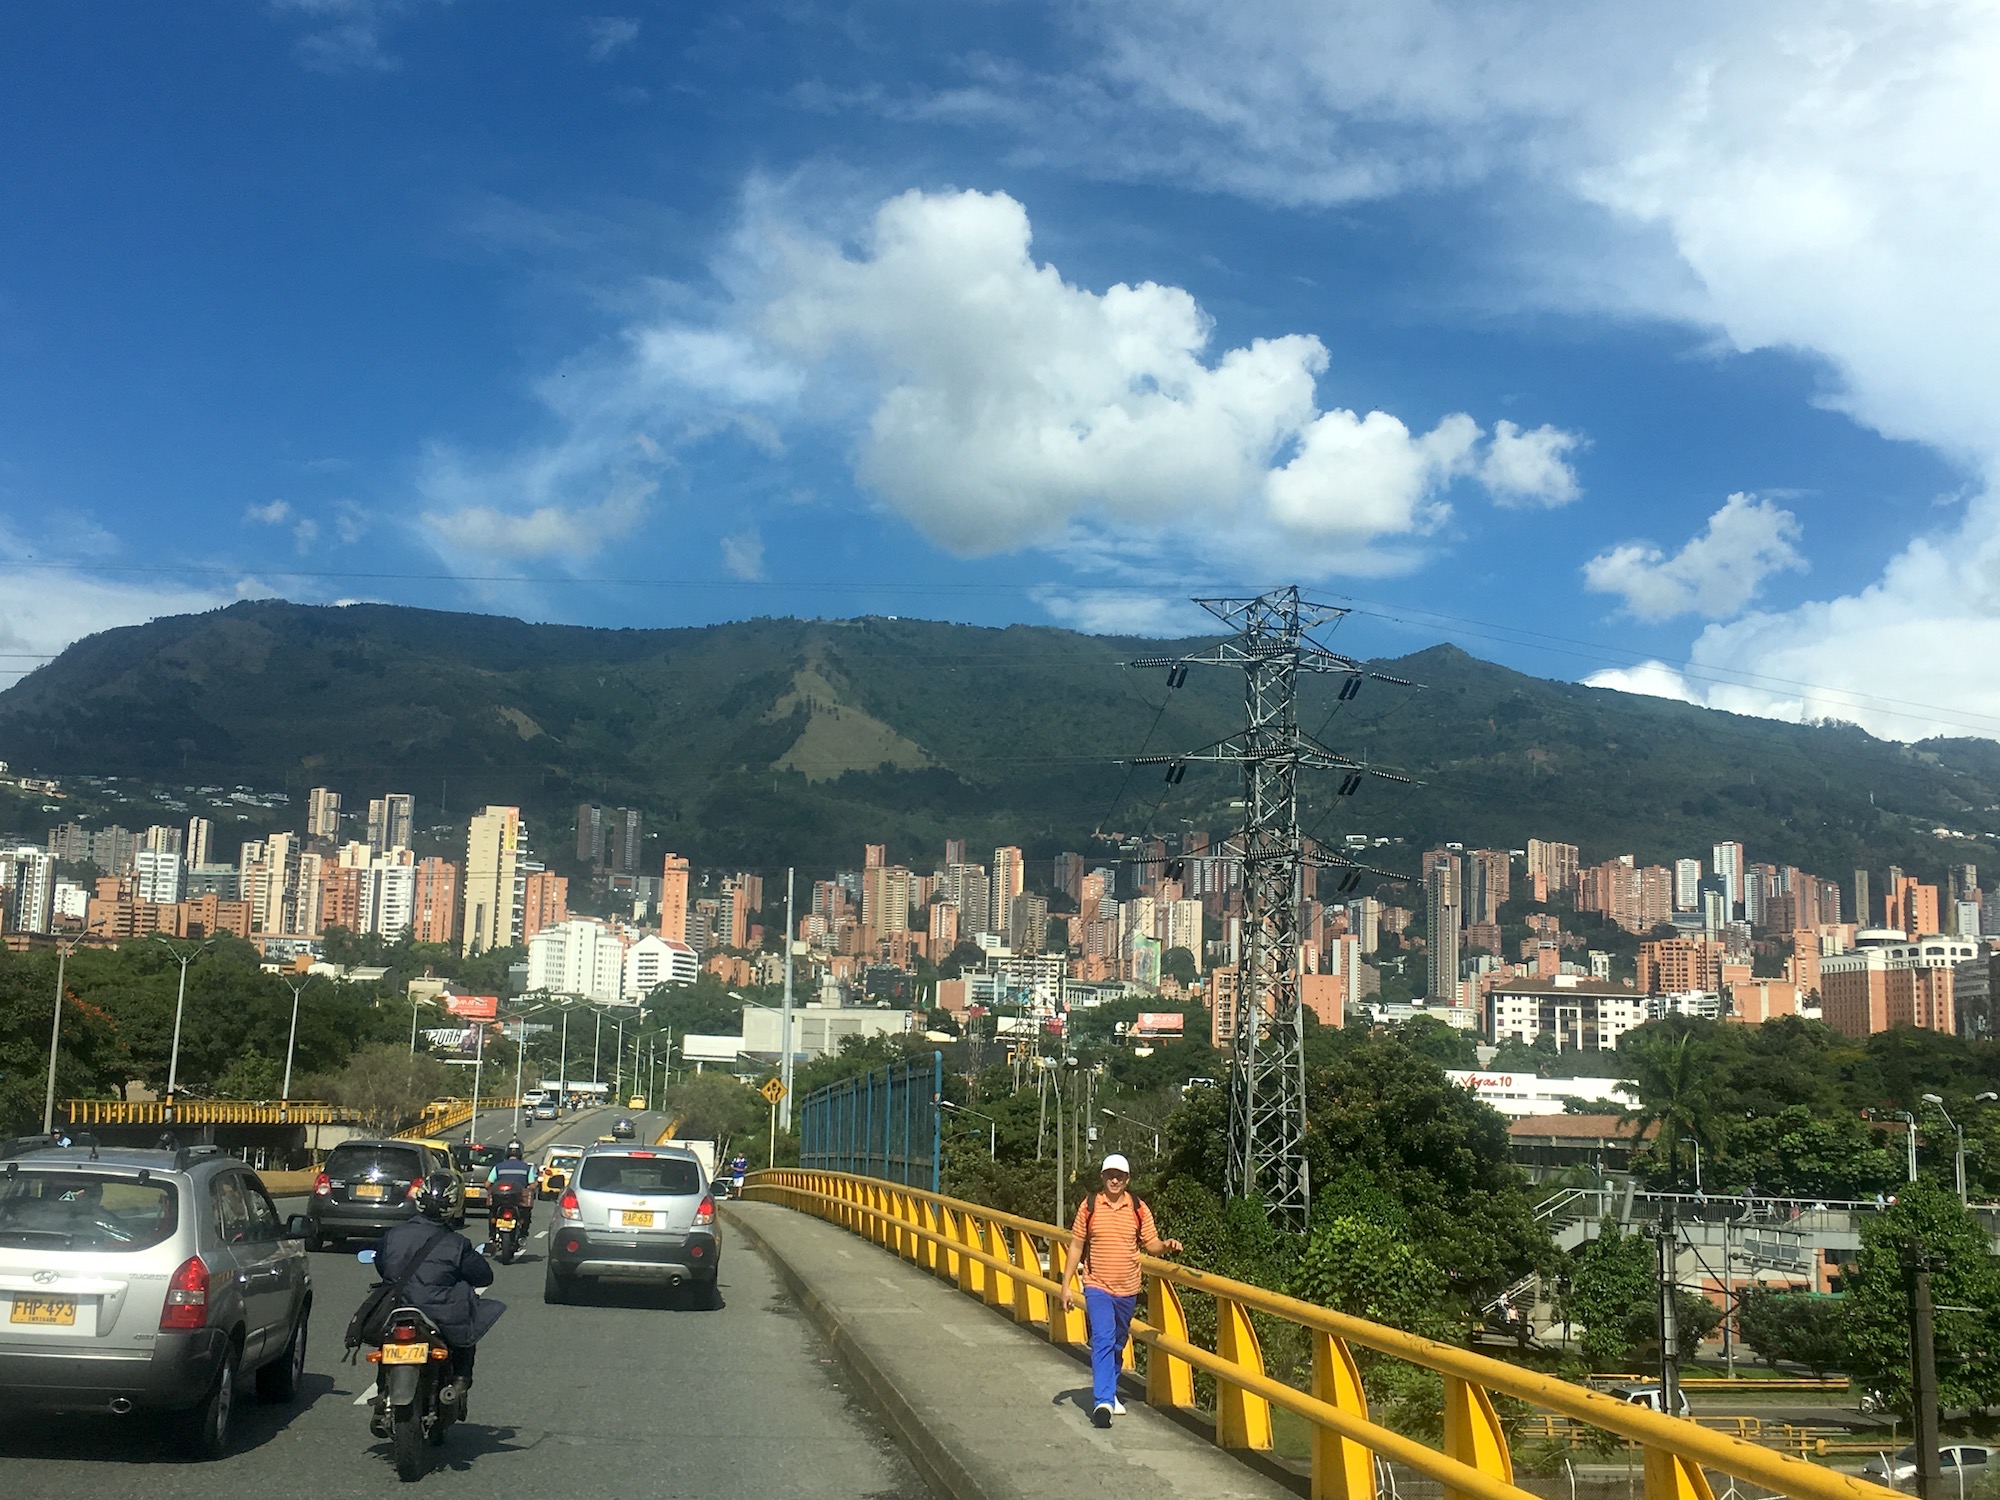 Entrance view of Medellin